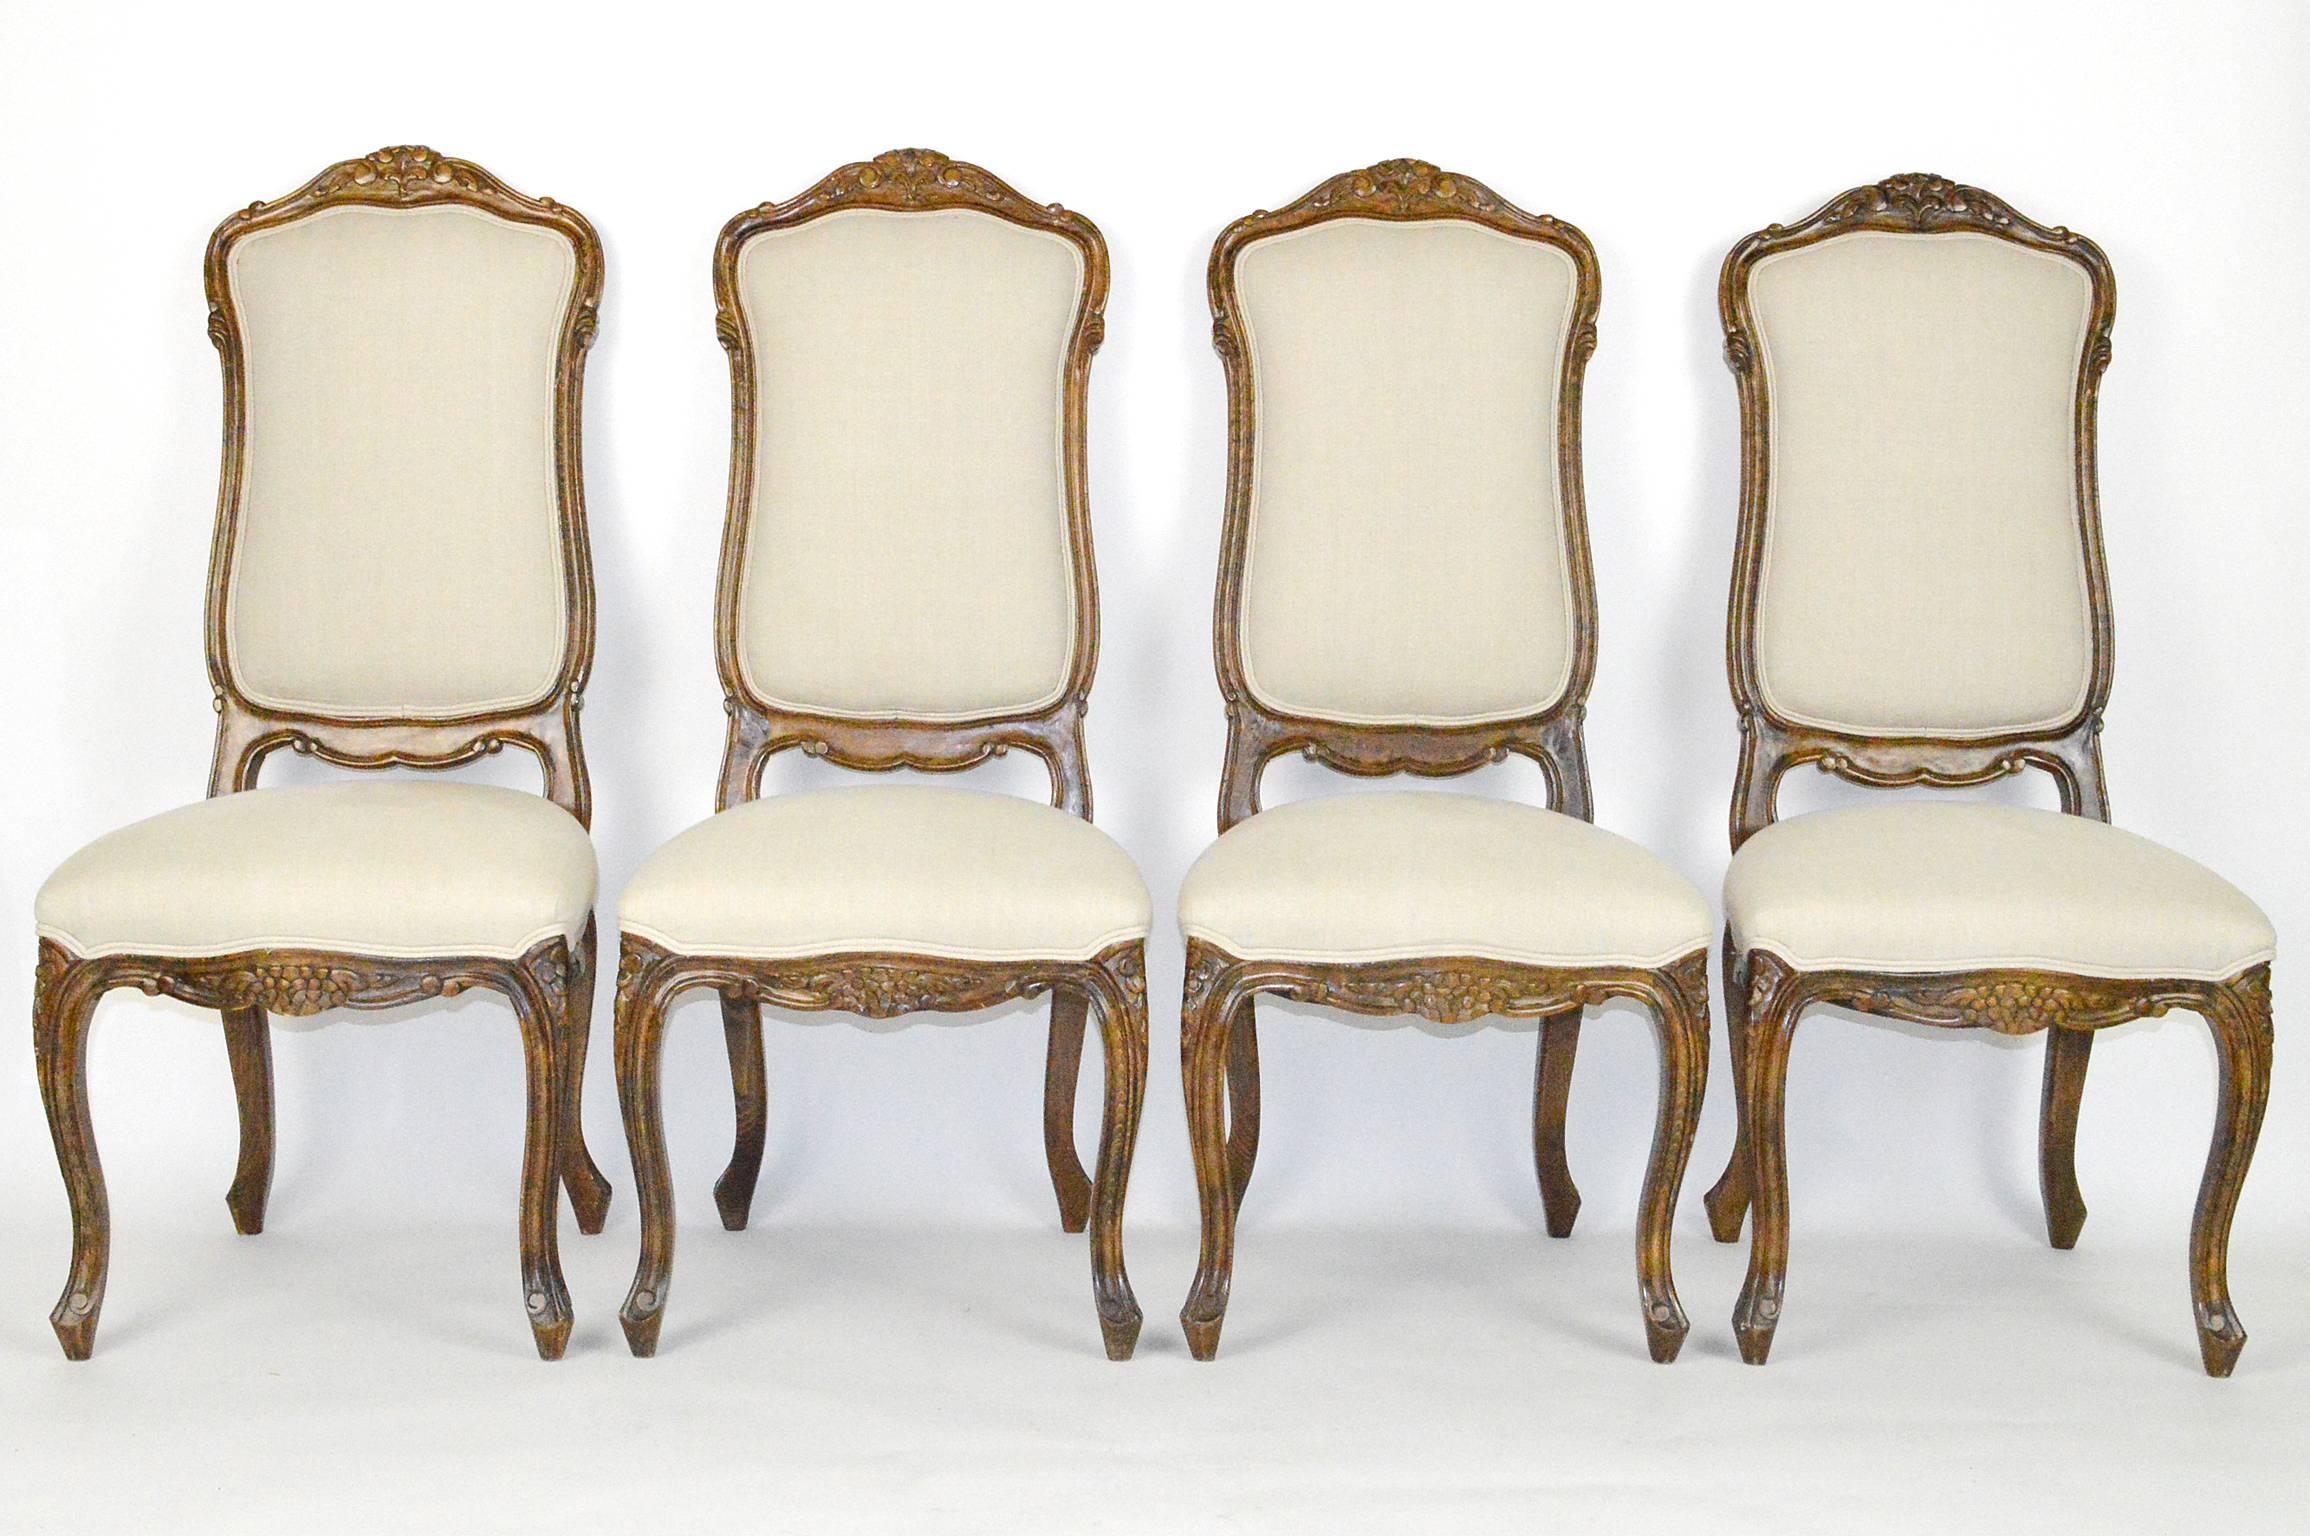 Set of four Louis XVI style fruitwood high back side chairs covered in linen.